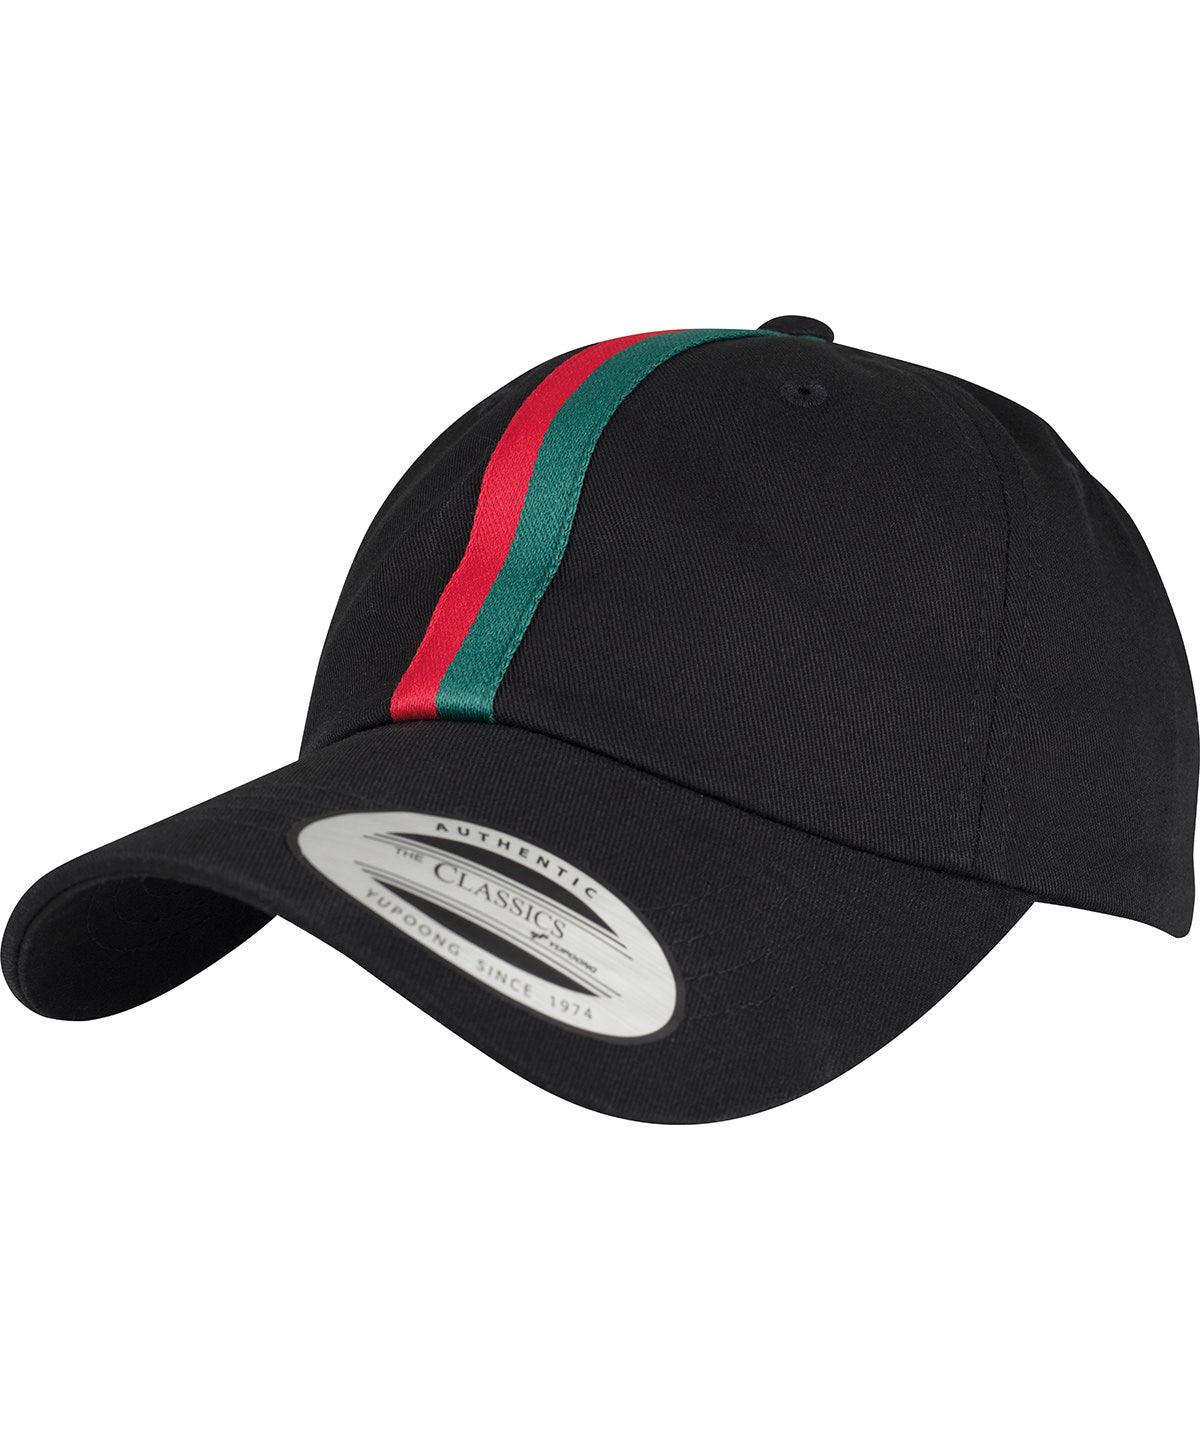 White/Fire Red/Green - Stripe dad hat (6245DS) | Schoolwear Centres